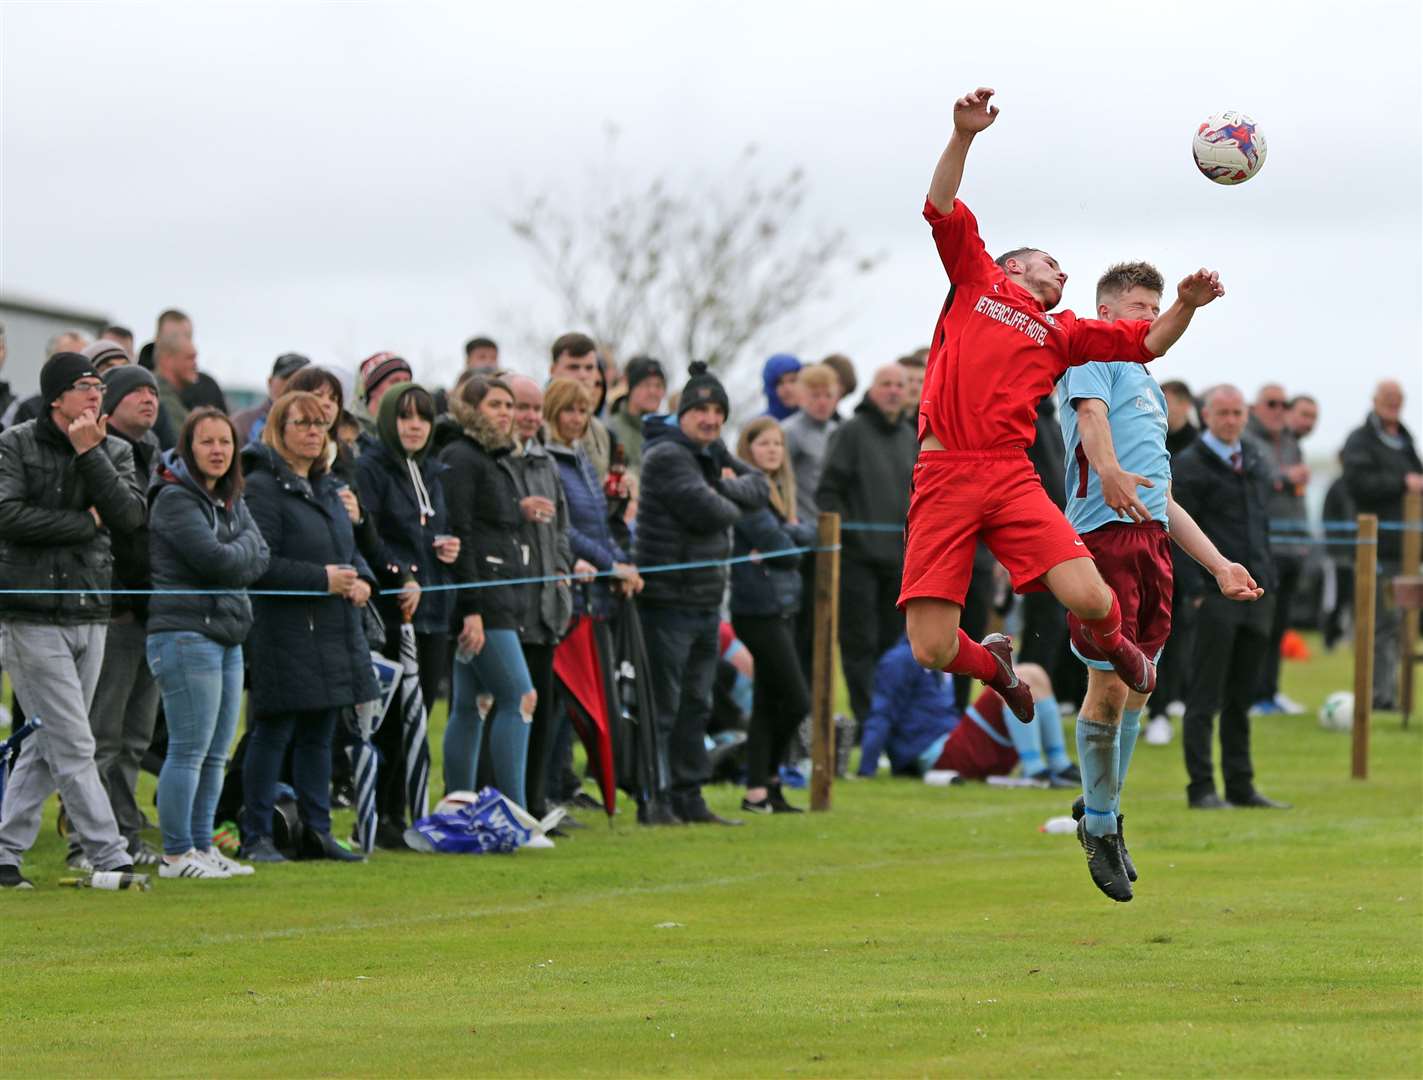 Pentland United against Wick Groats in the 2019 Eain Mackintosh Cup final at Halkirk. Games between these two clubs can attract crowds of several hundred. Picture: James Gunn